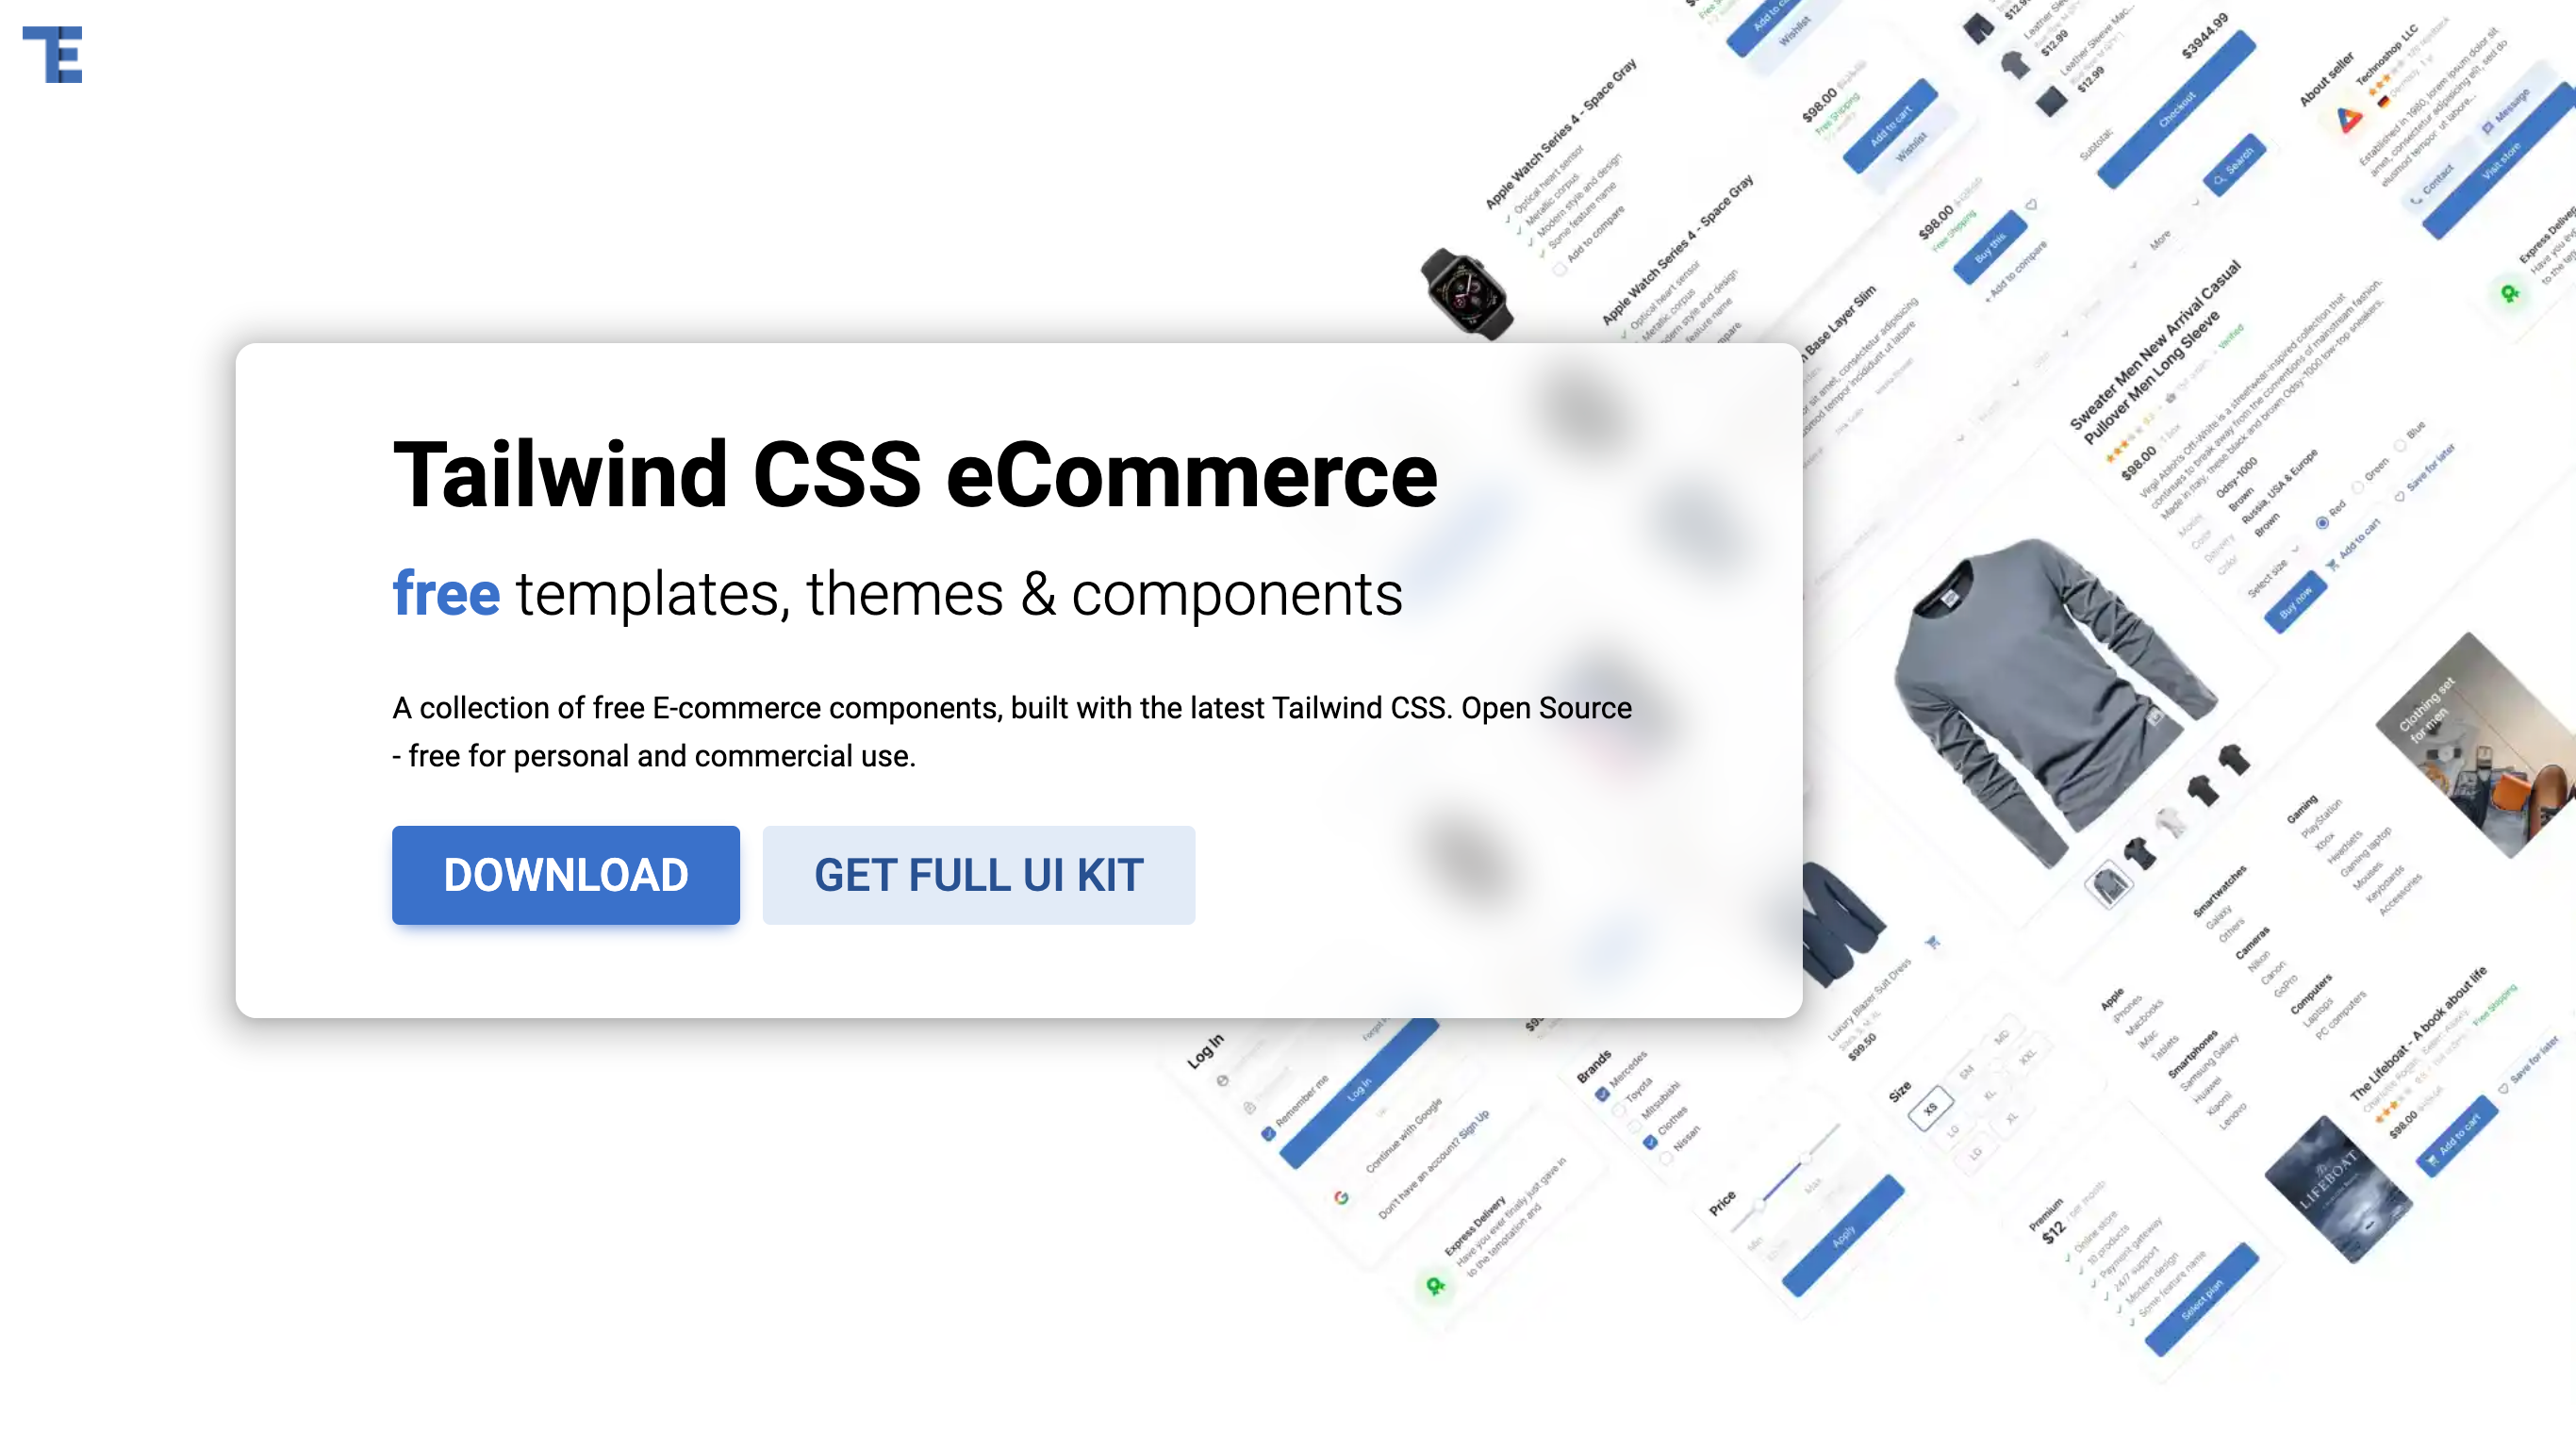 Tailwind CSS eCommerce Components